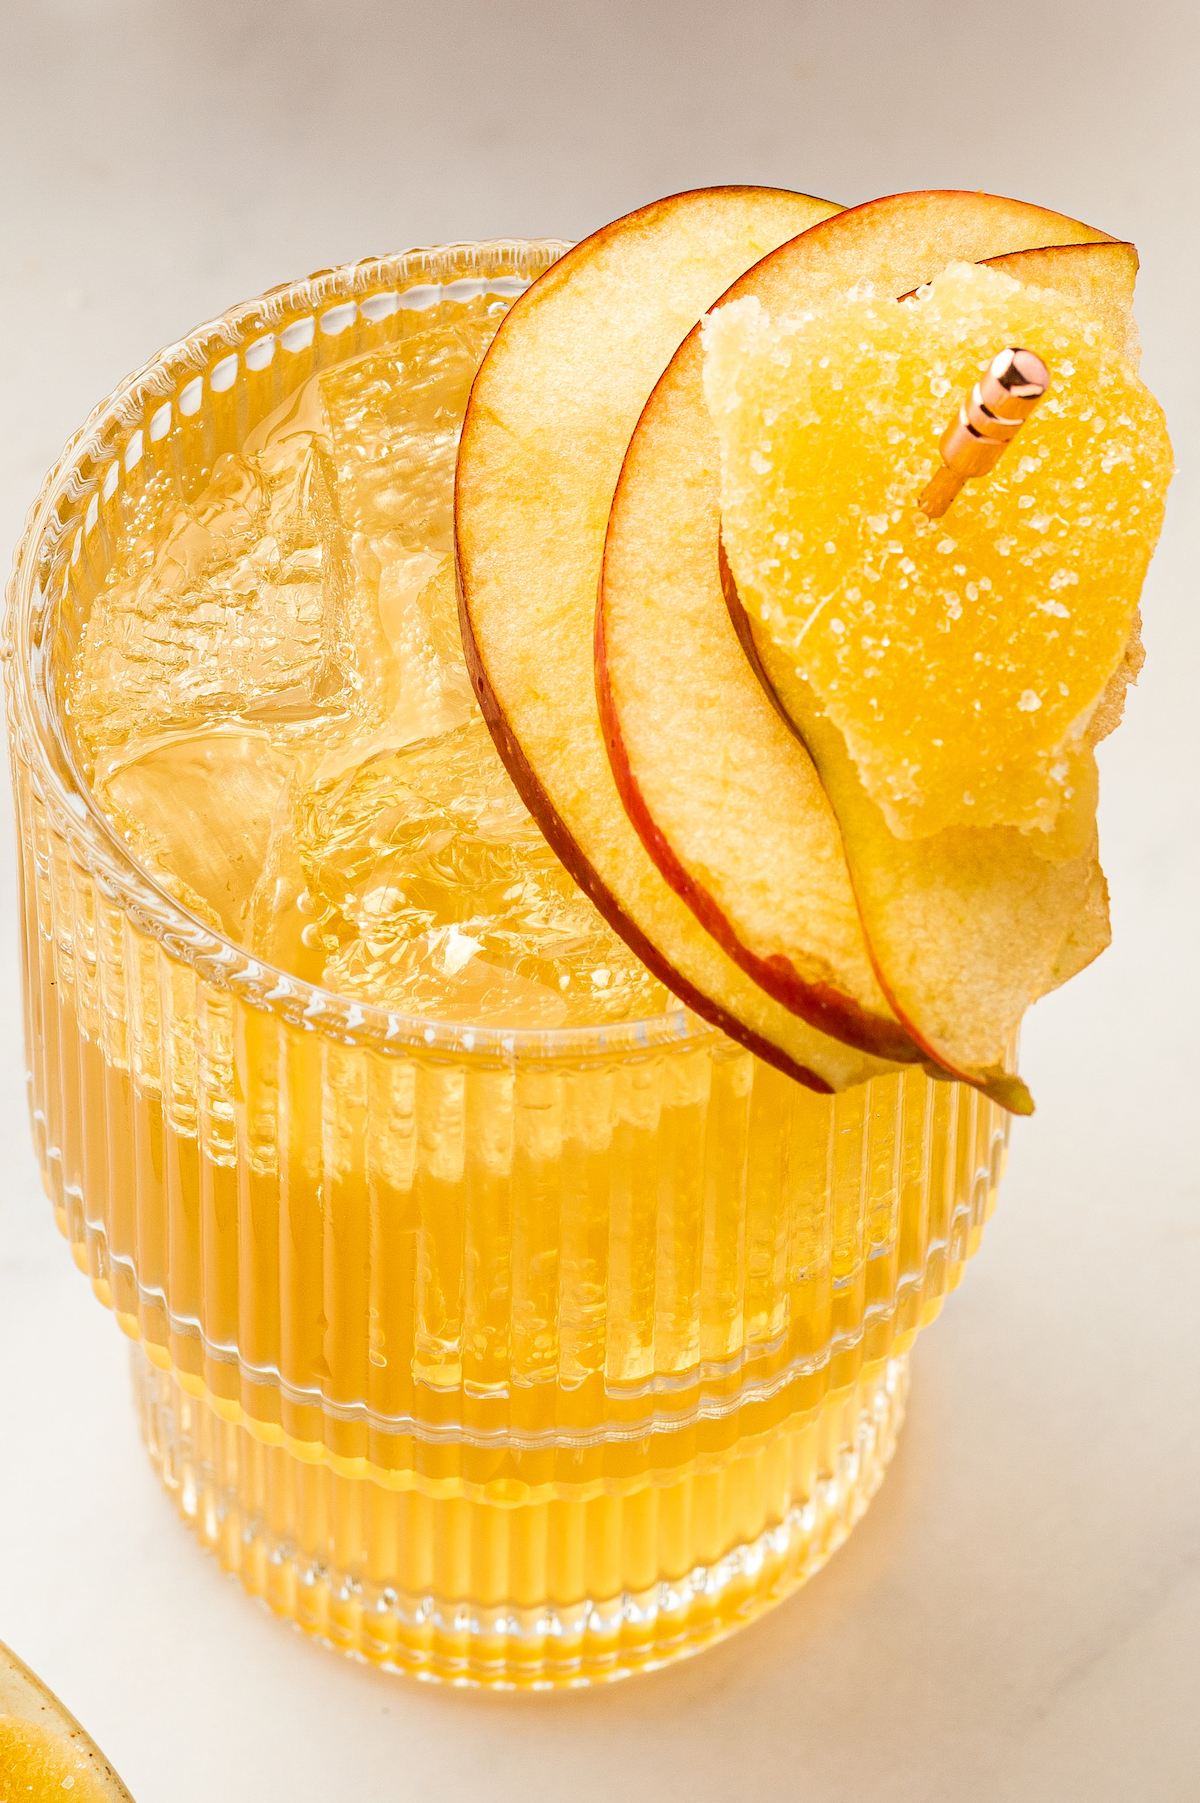 Spiked apple cider over crushed ice.